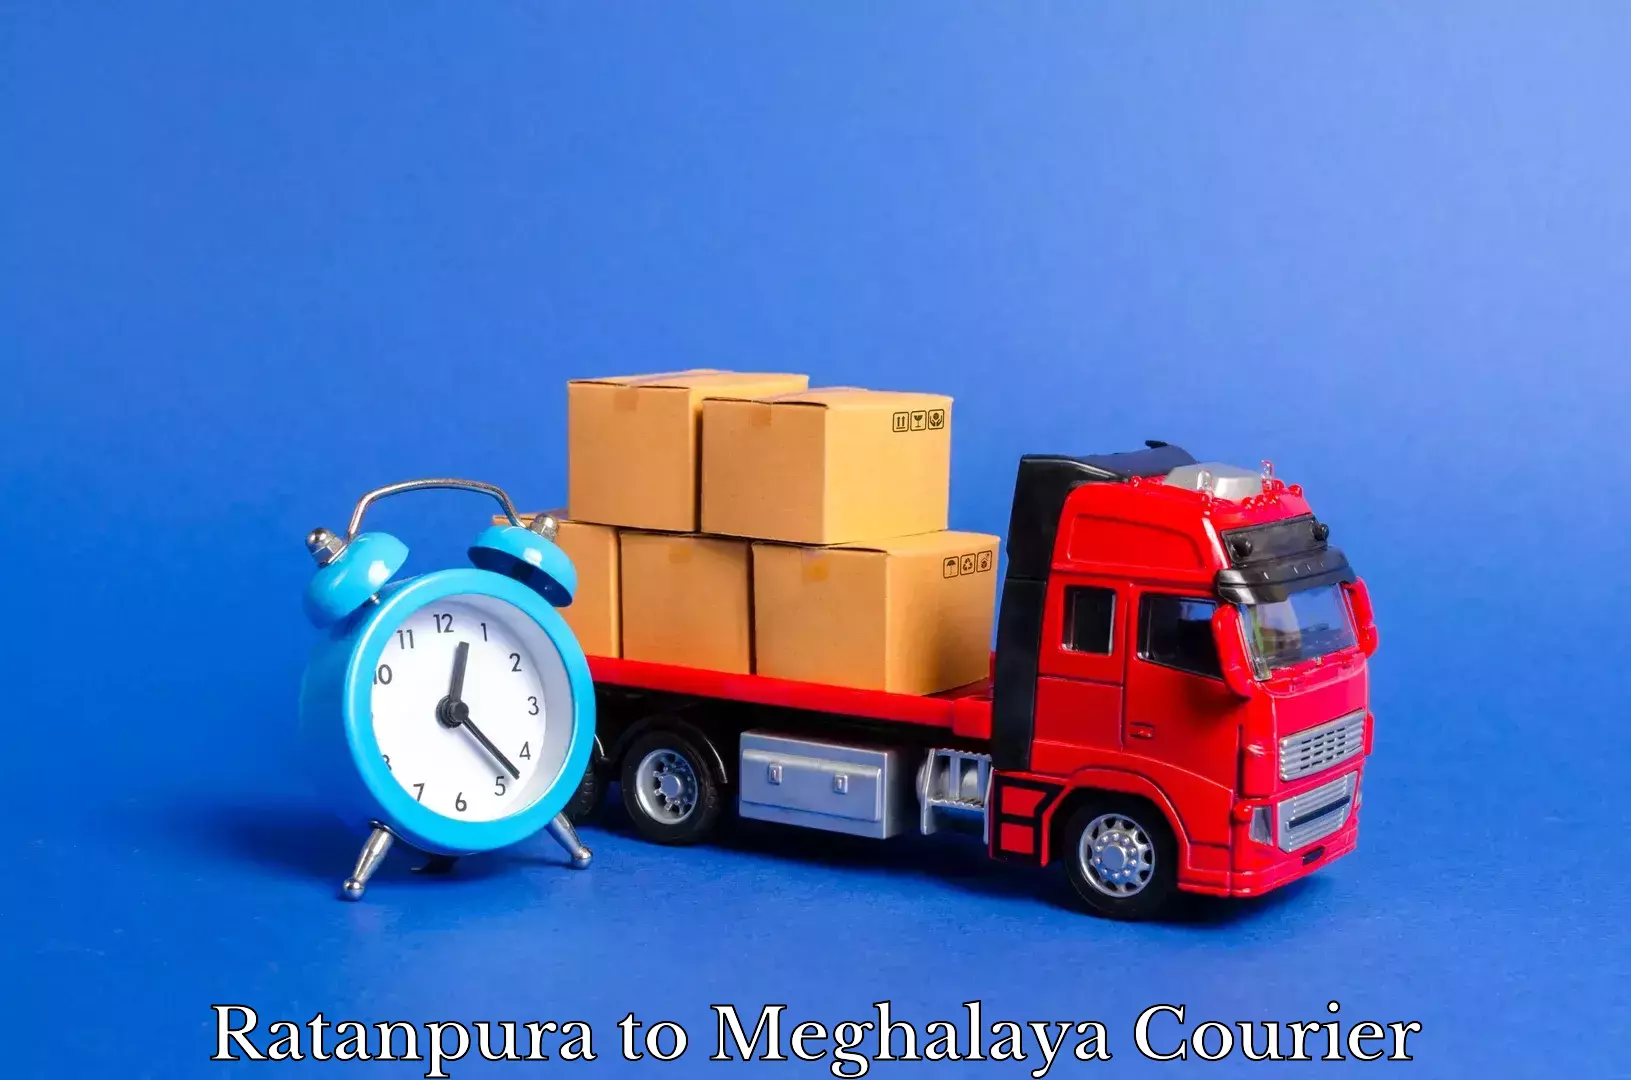 Trusted relocation experts Ratanpura to Meghalaya